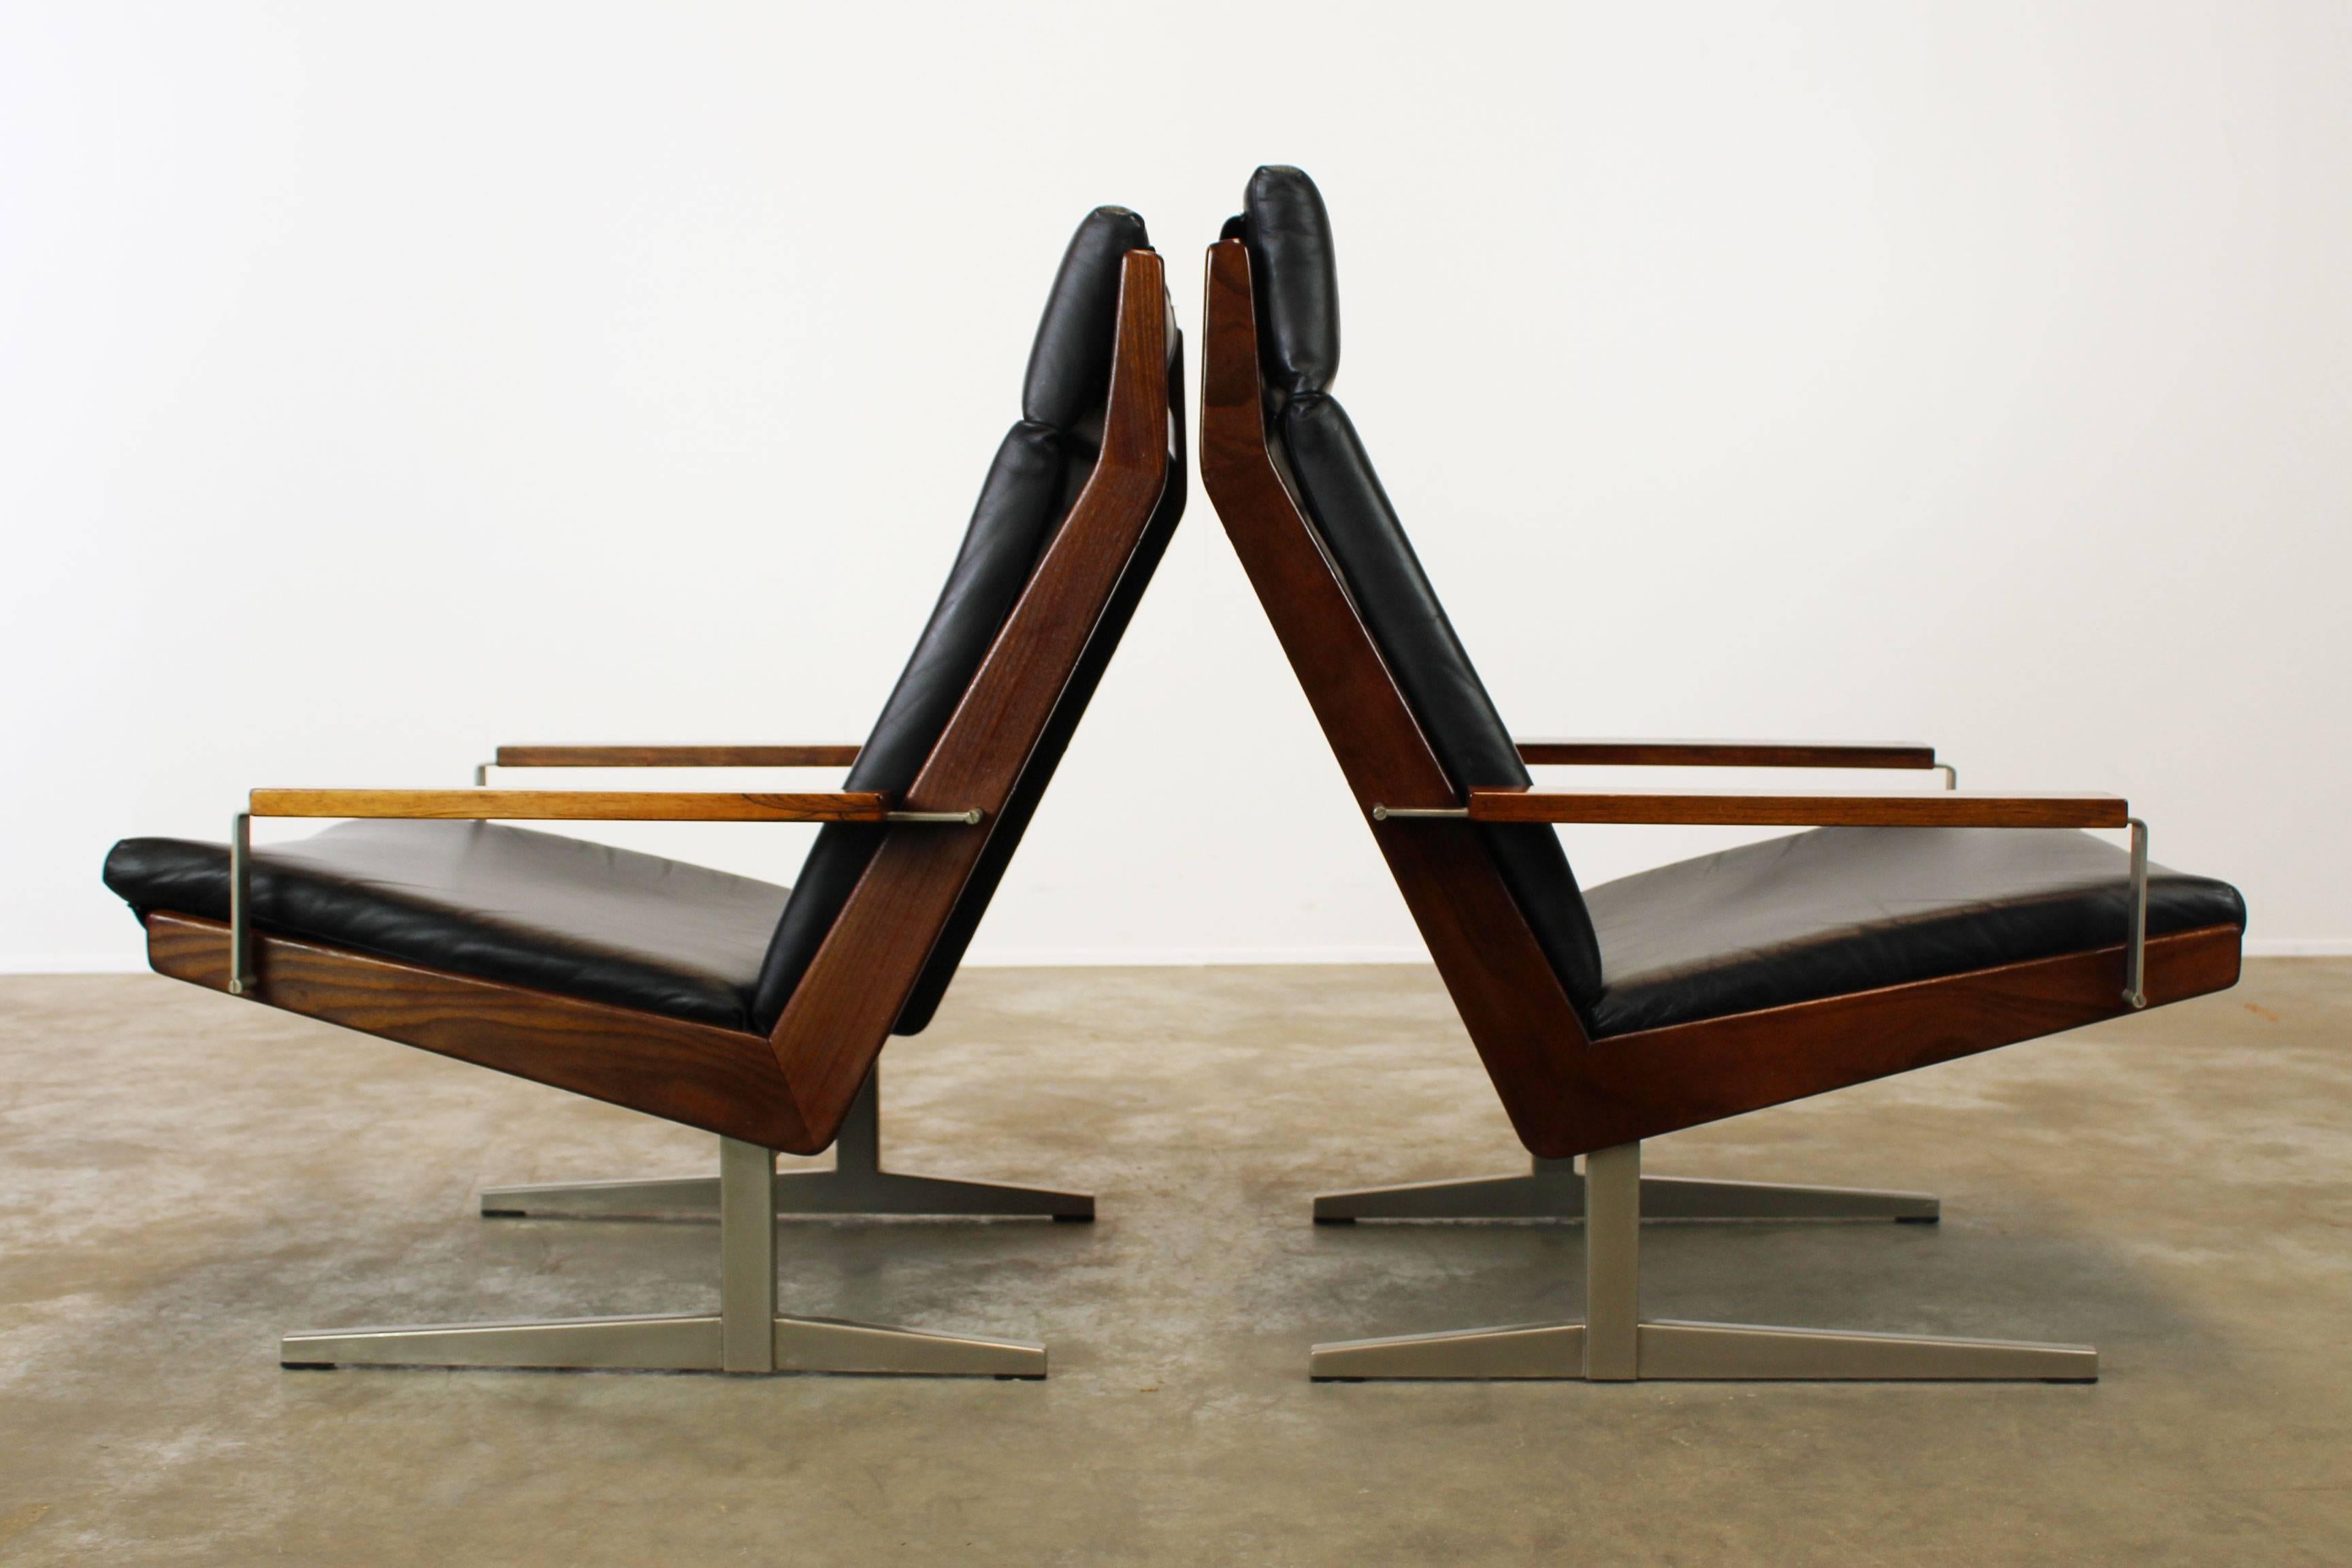 Mid-20th Century Rare Pair of Lotus Lounge Chairs by Rob Parry for Gelderland 1960 Dutch Design